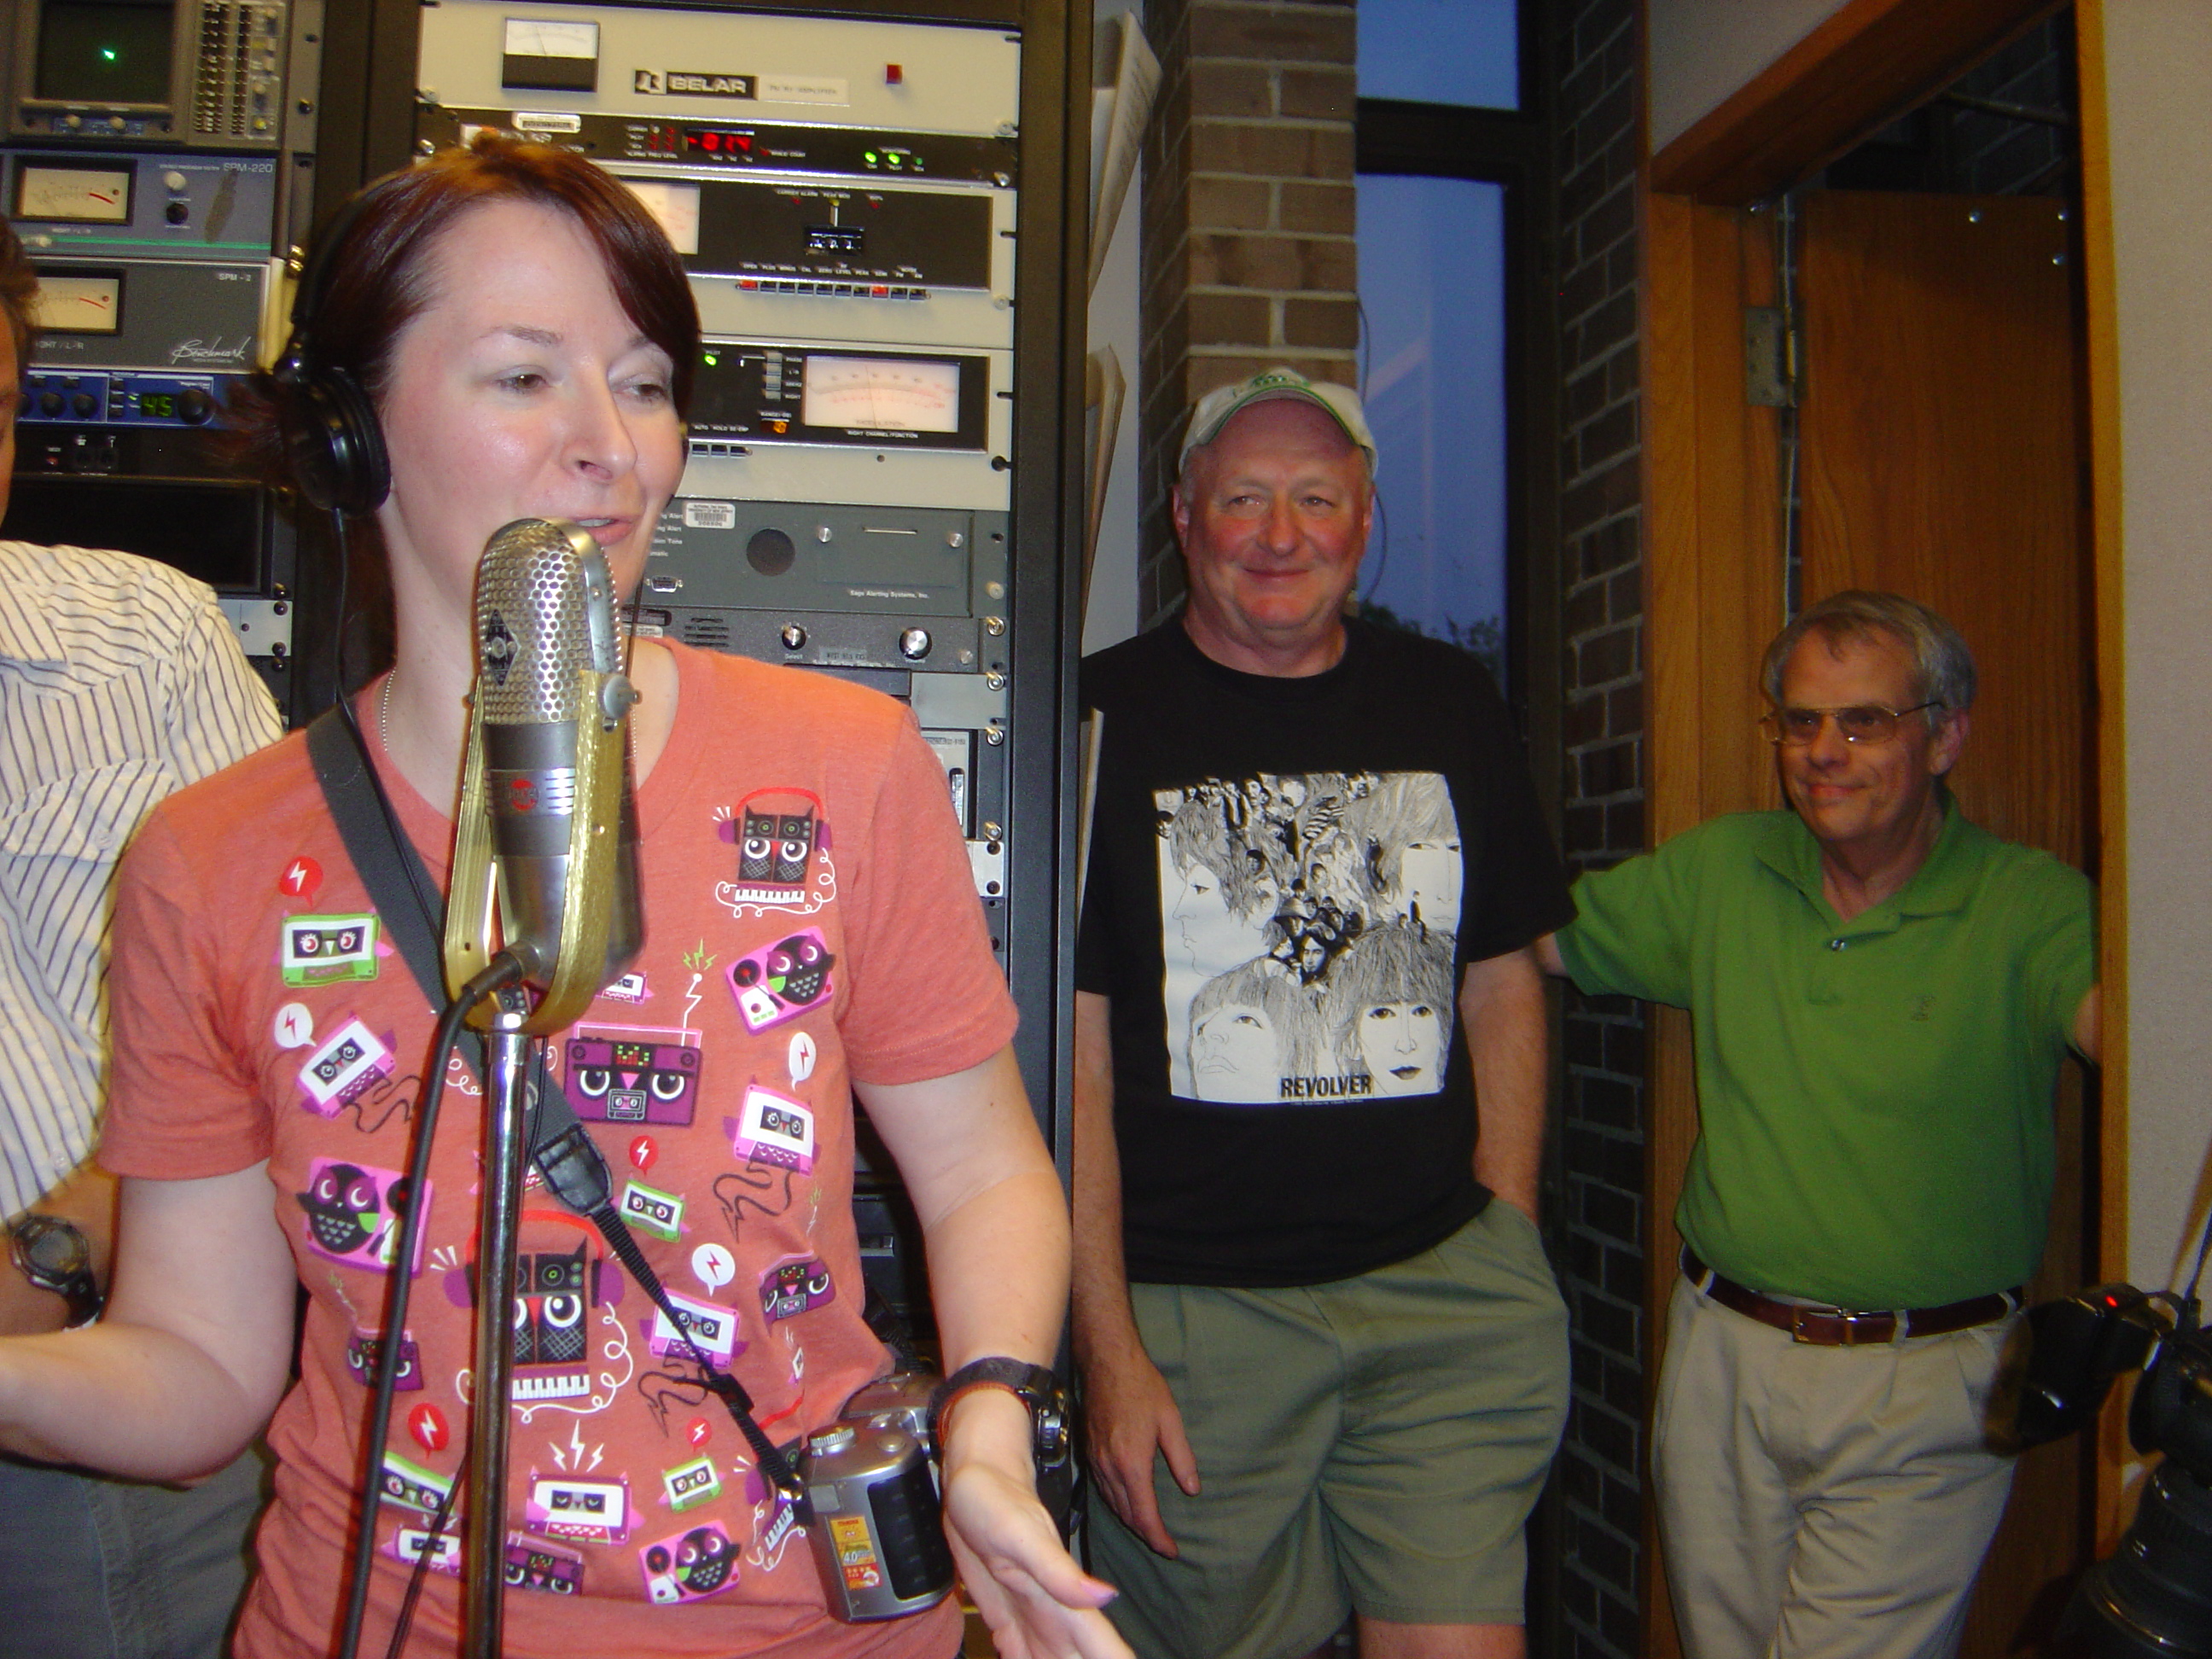 Lisa Uber at the microphone, John Cooper and Tim Espar look on.